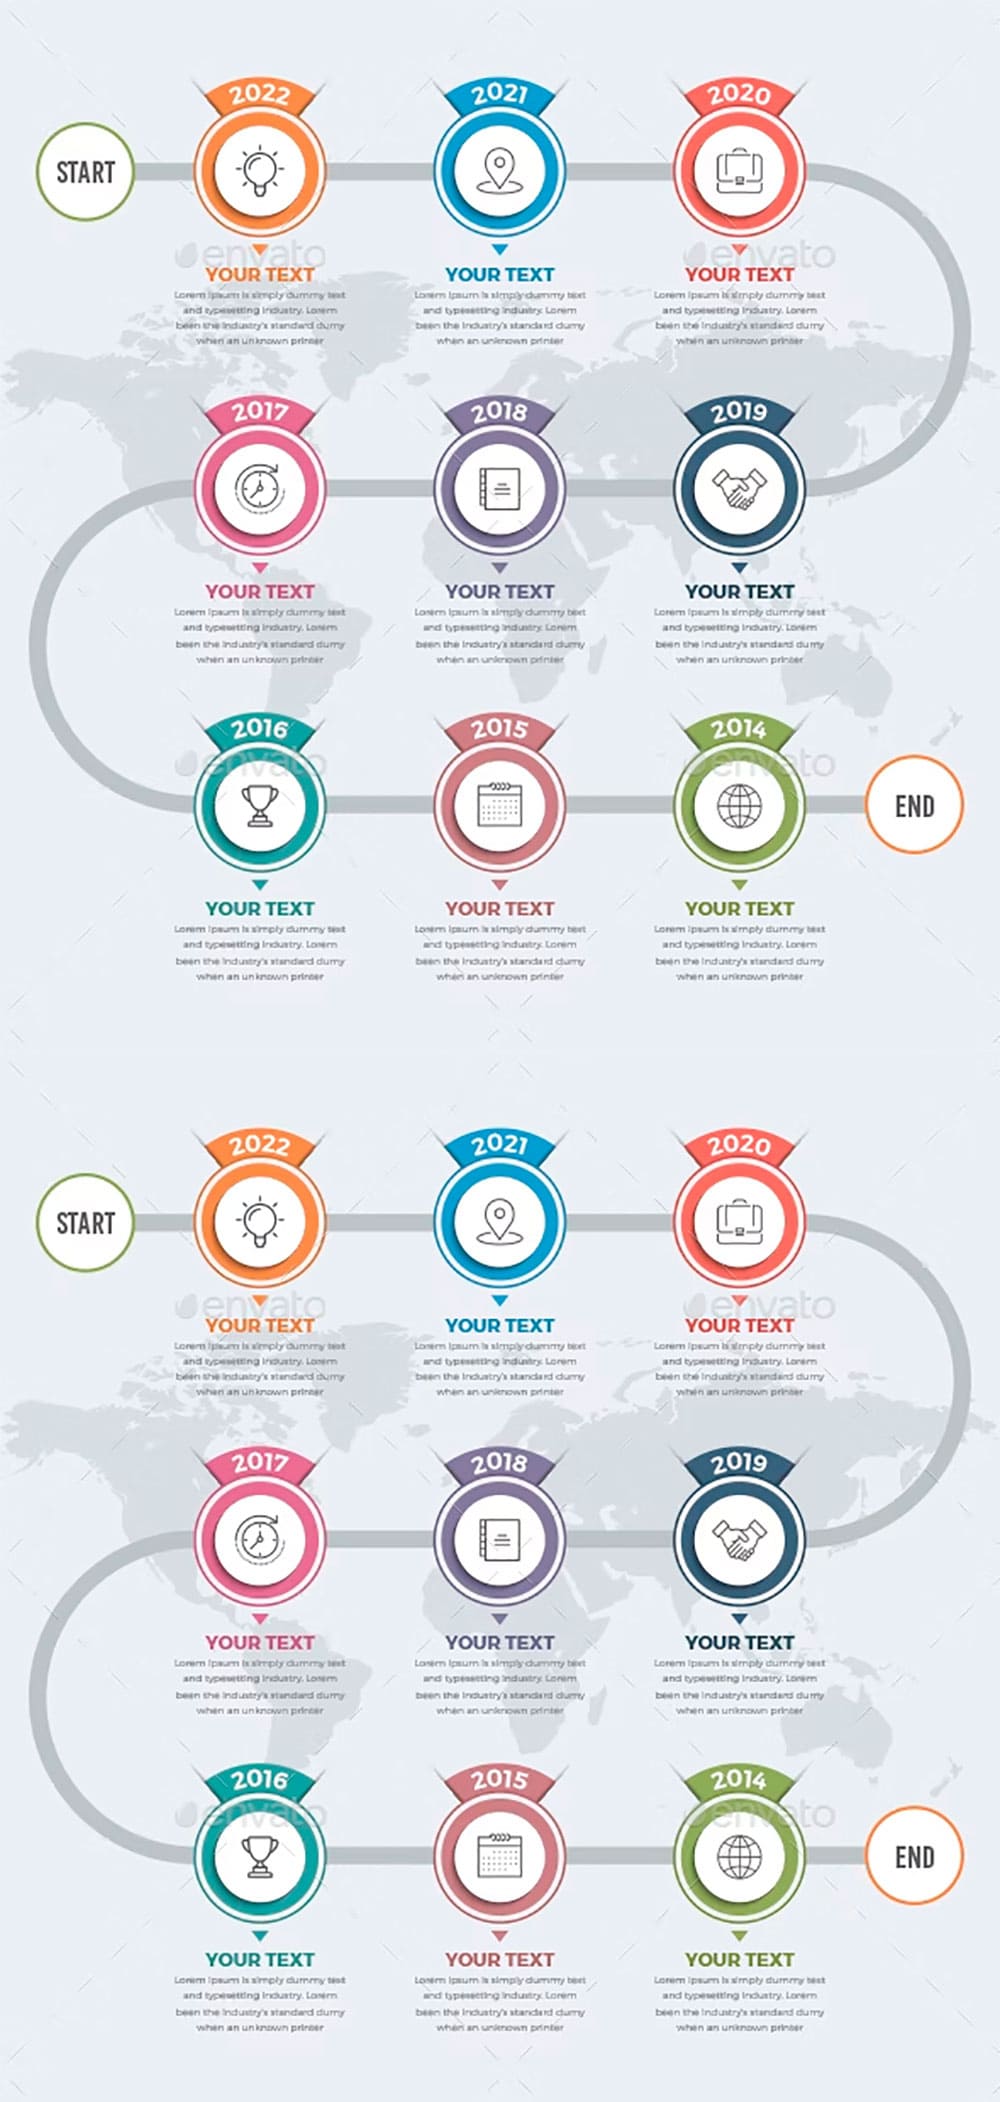 Timeline infographics, picture for pinterest.